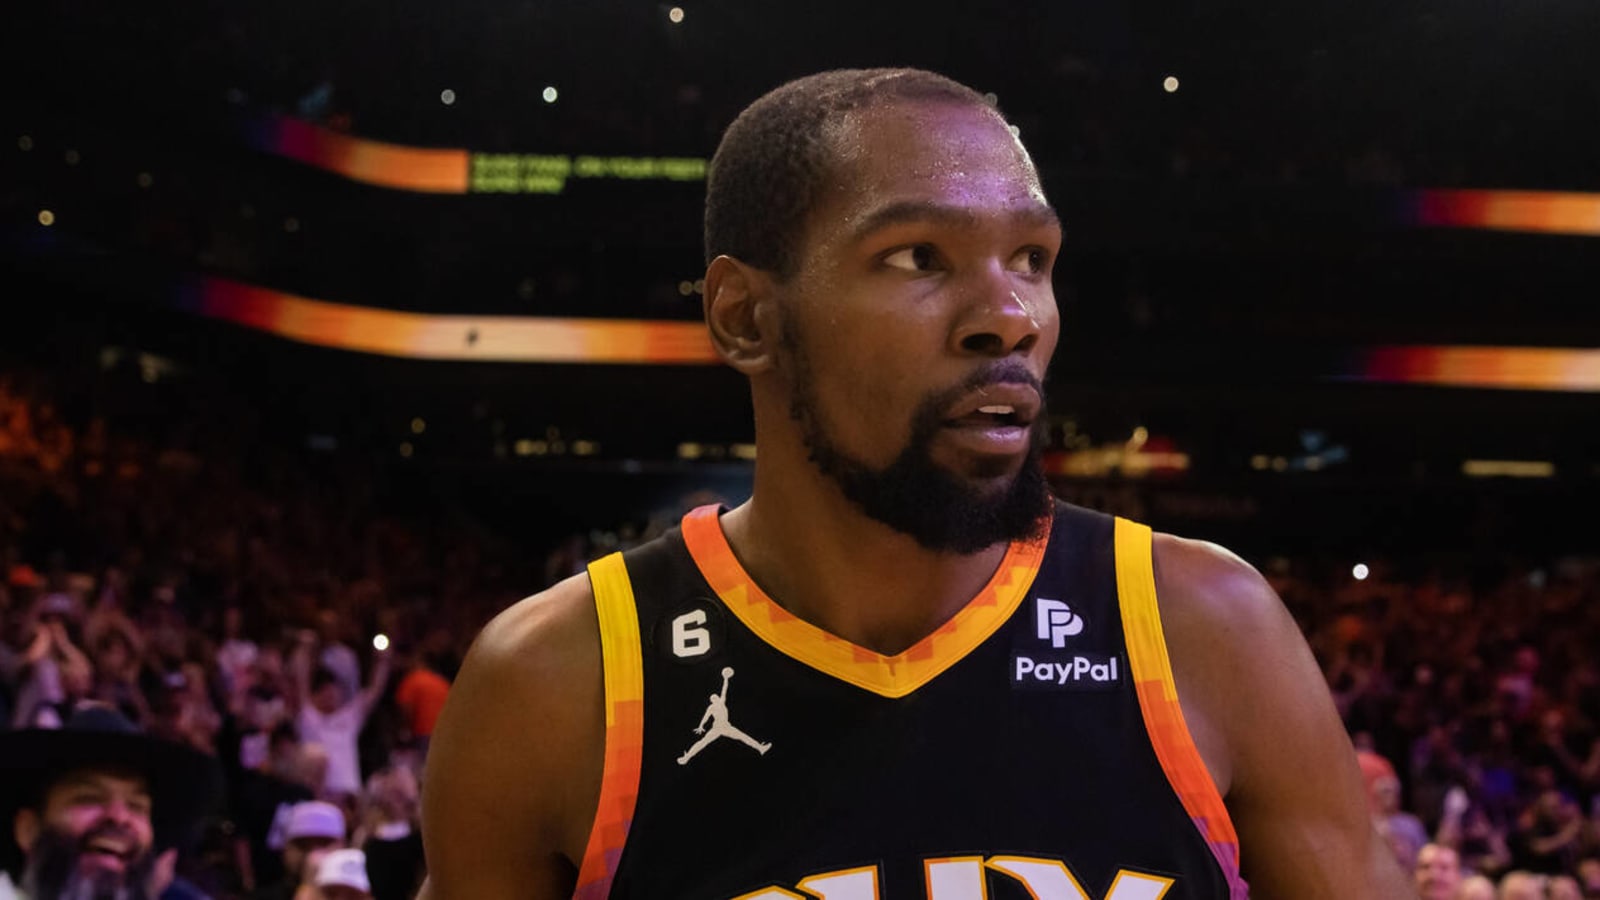 Blazers player takes swipe at Durant over new superteam